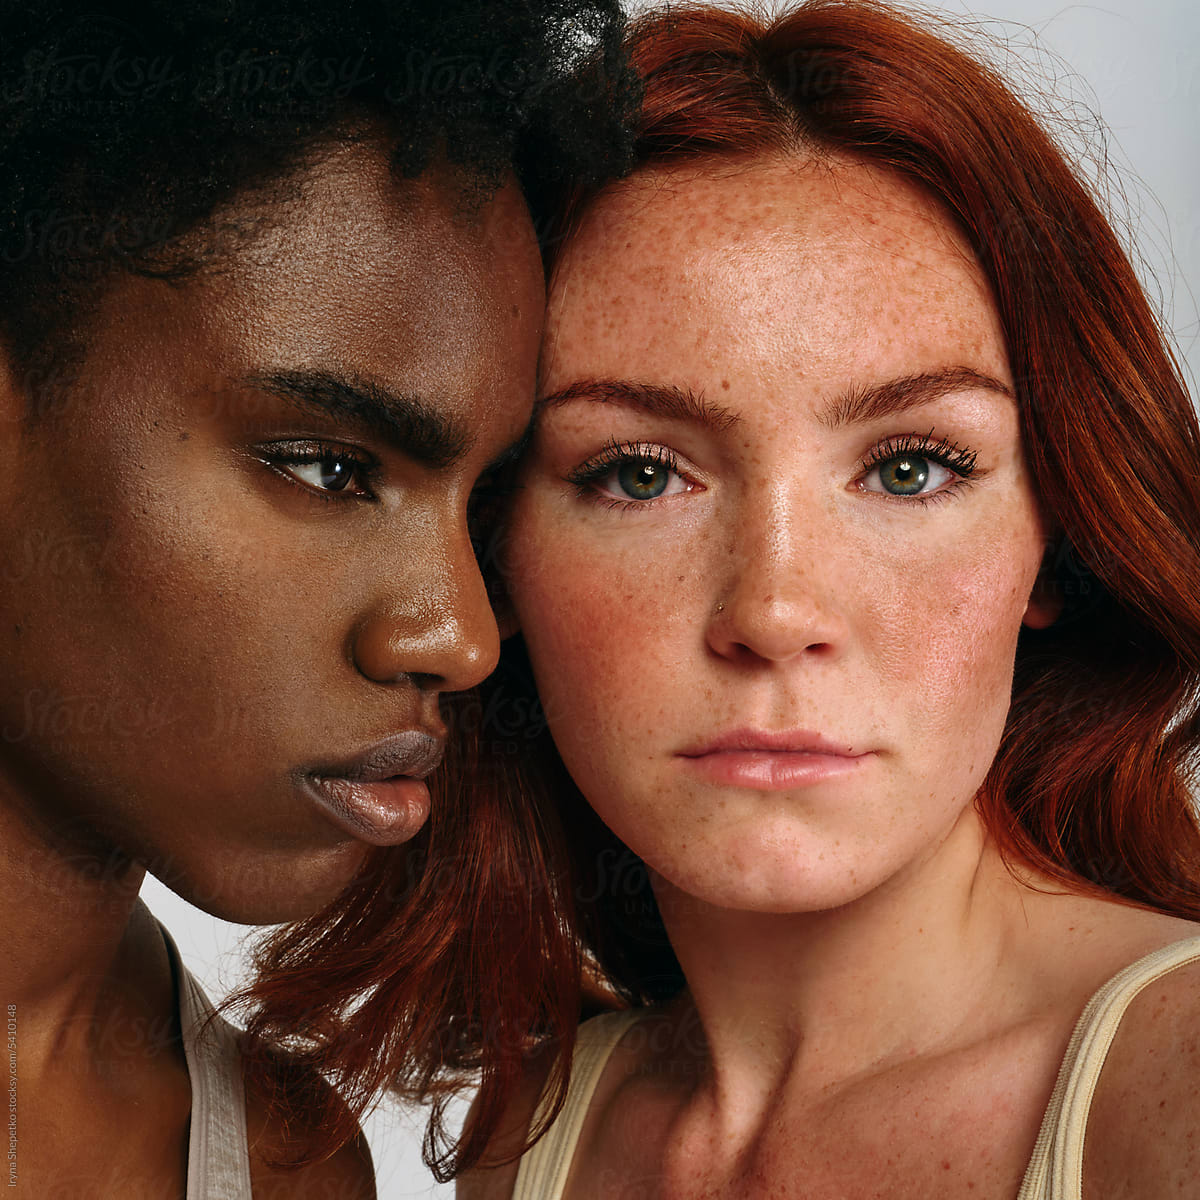 Close-up portrait of Black woman and redhead with freckles